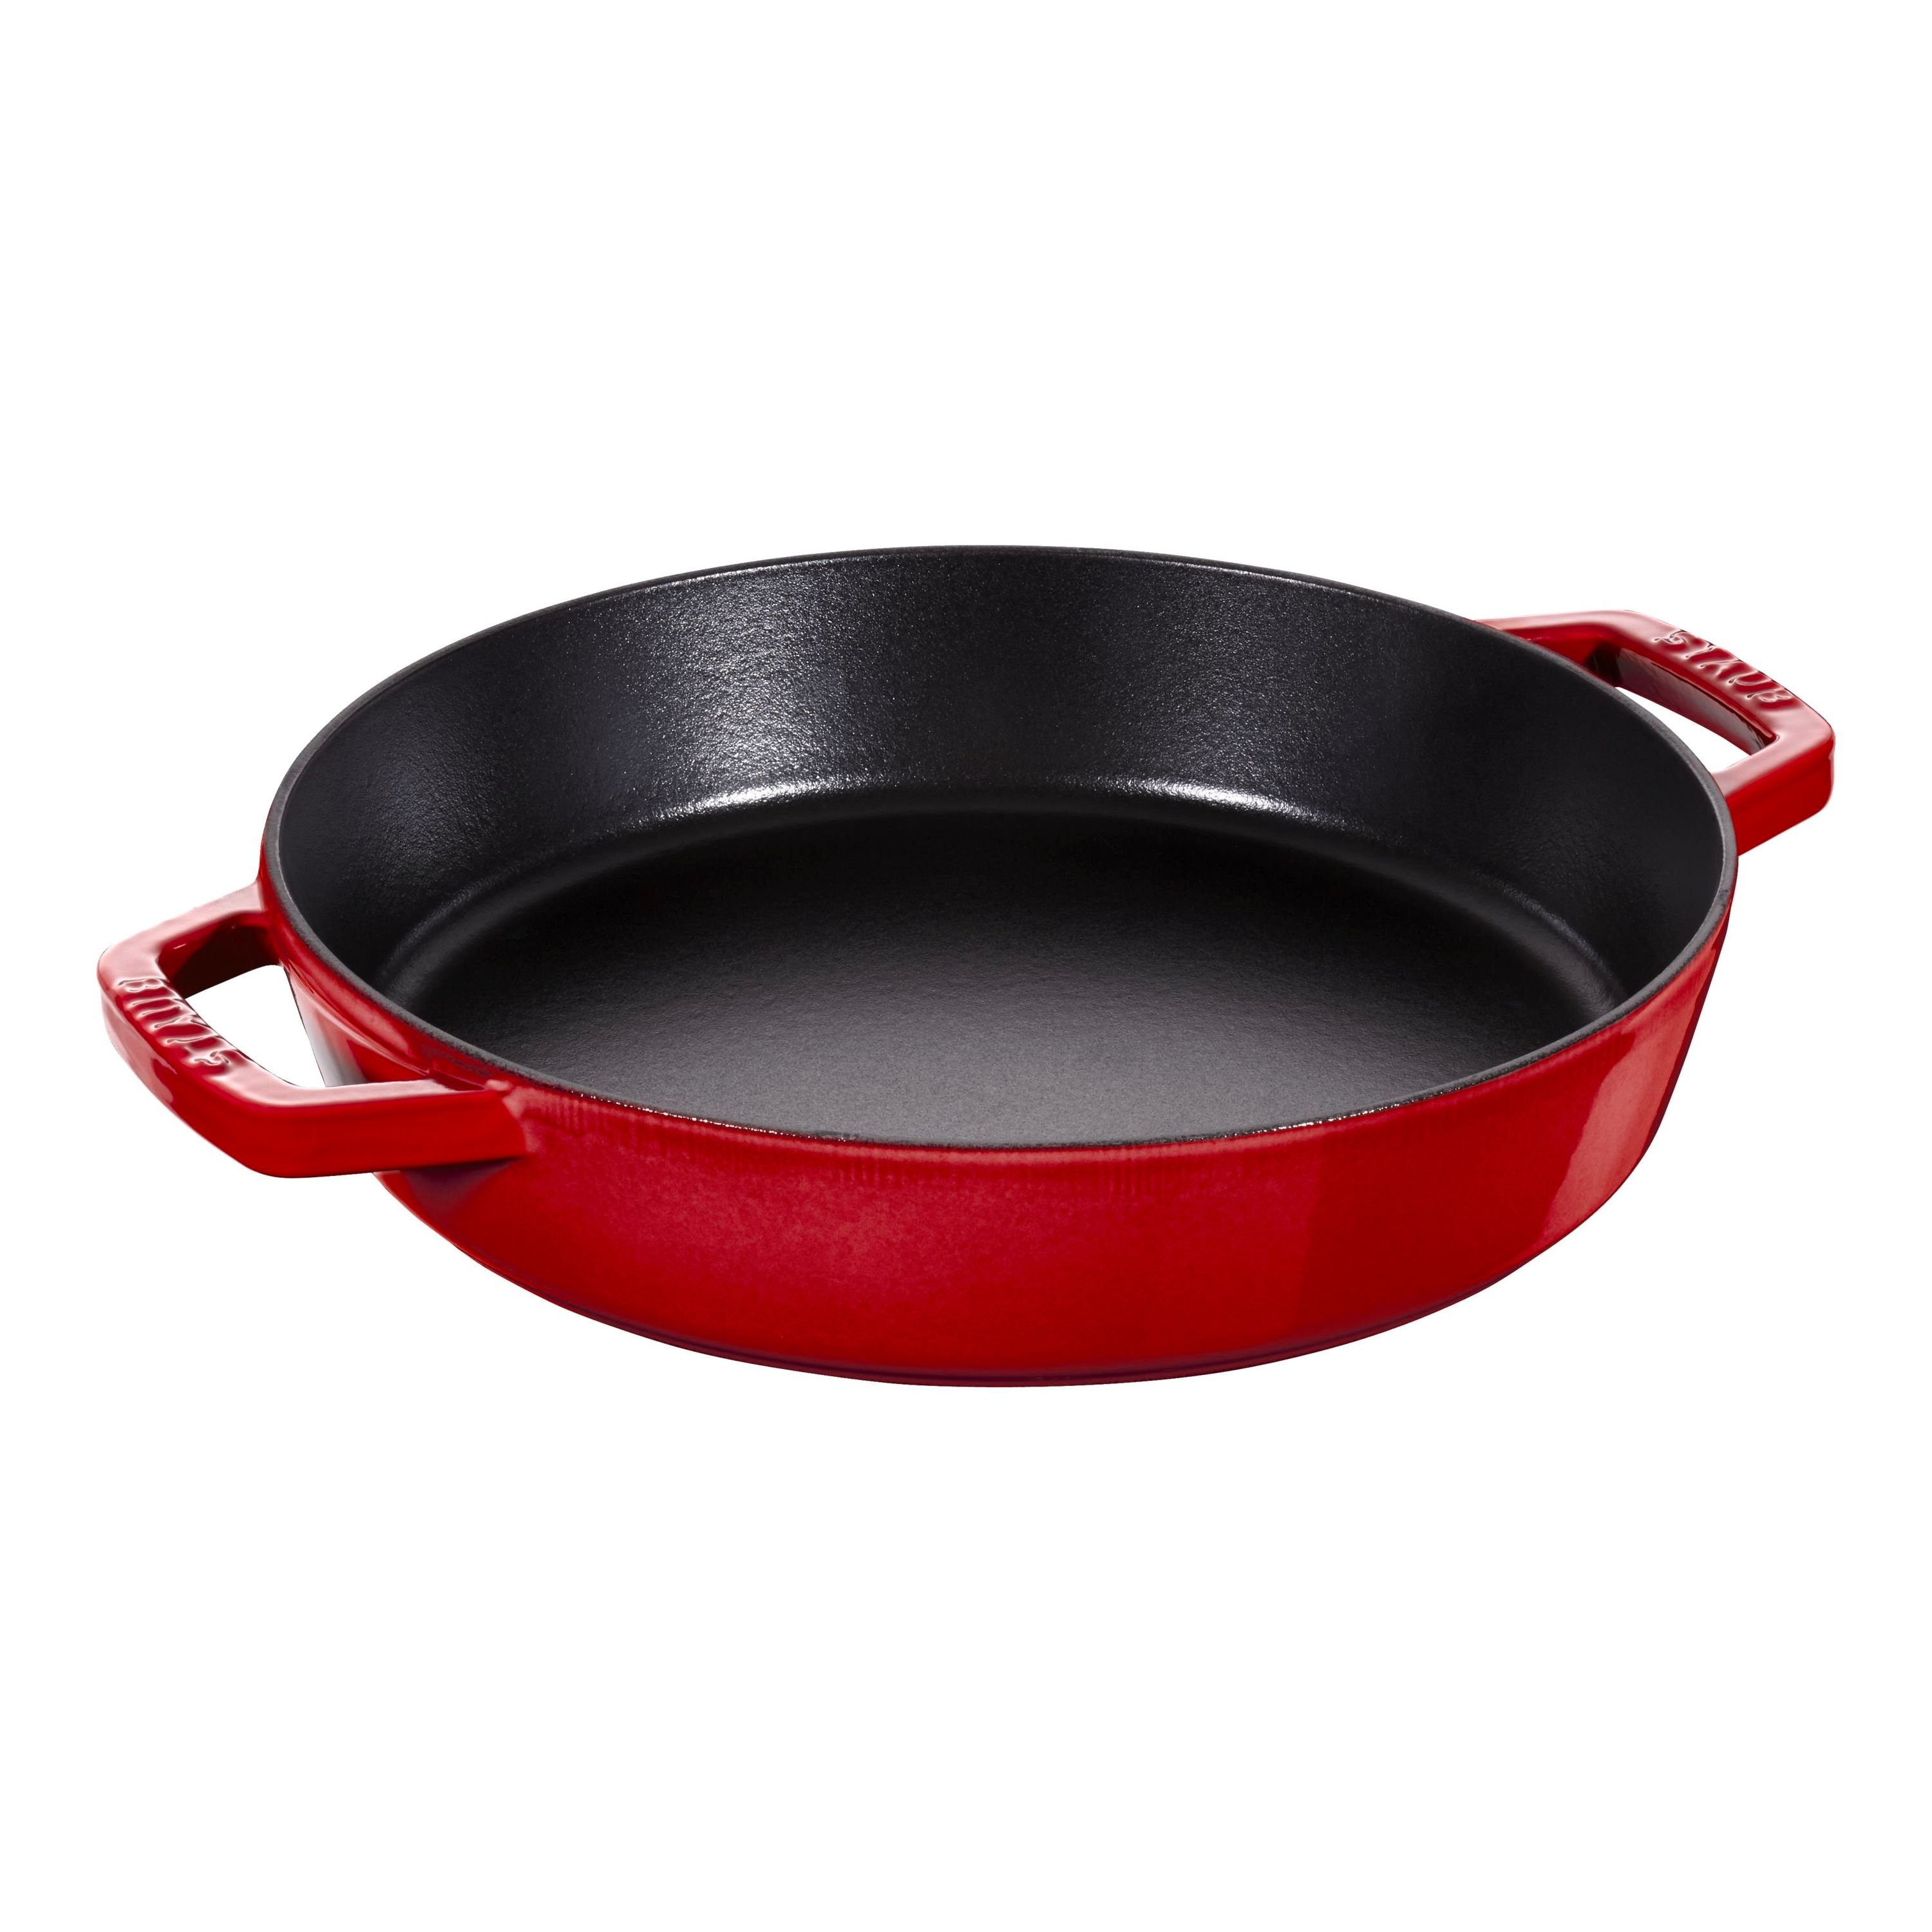 Staub Cast Iron - Fry Pans/ Skillets 13-inch, Double Handle Fry Pan, cherry